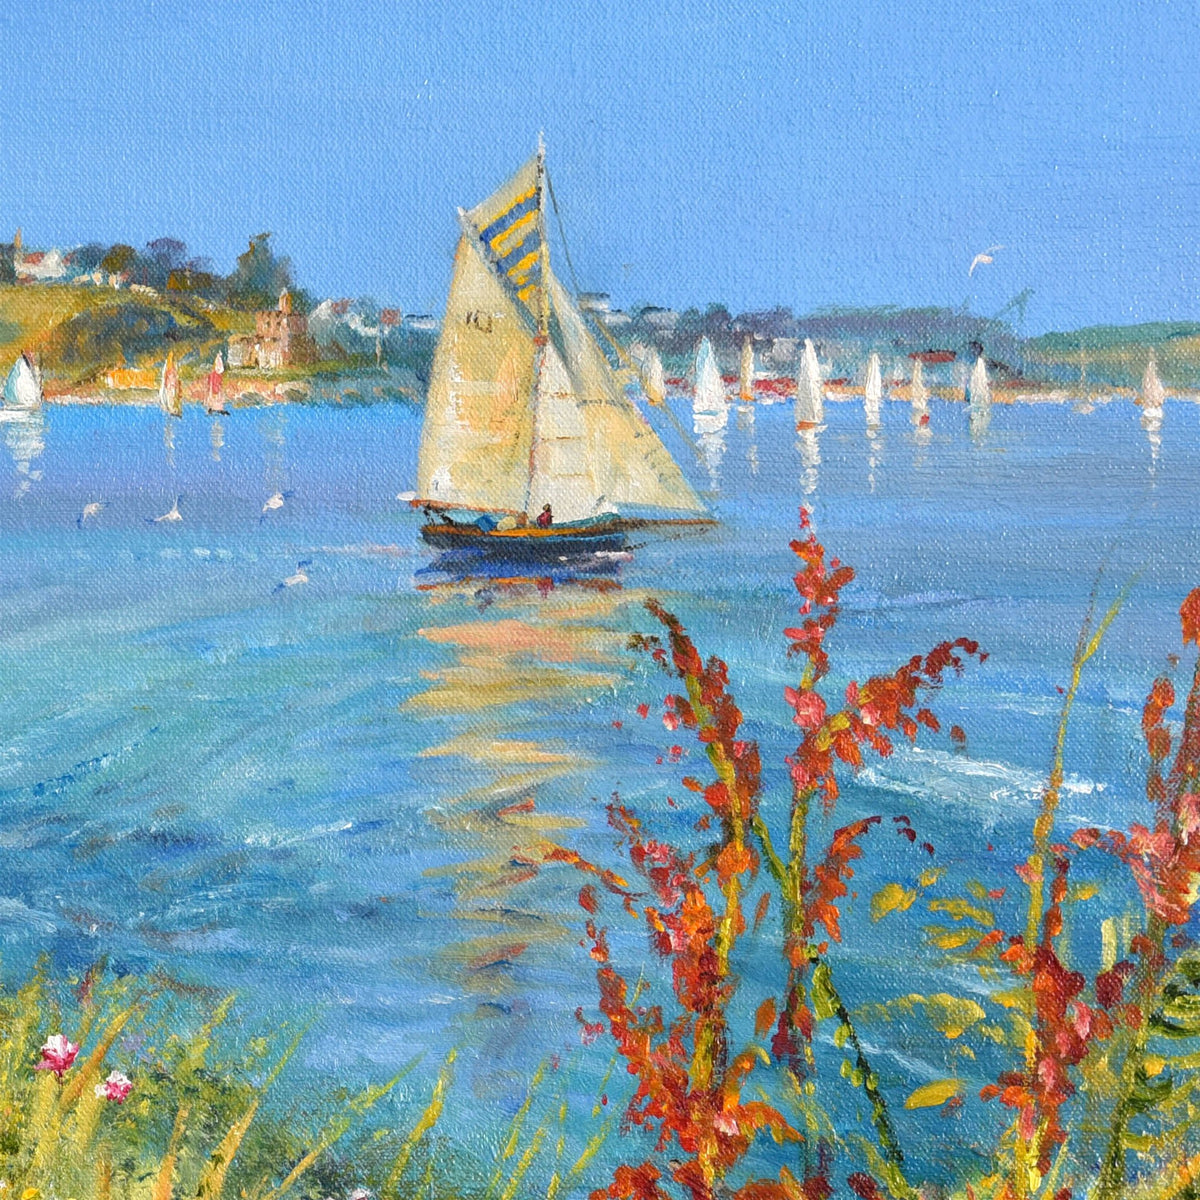 Original Oil Painting on Canvas. Time for a Treat. Pendennis Point.  By British Artist Ted Dyer.